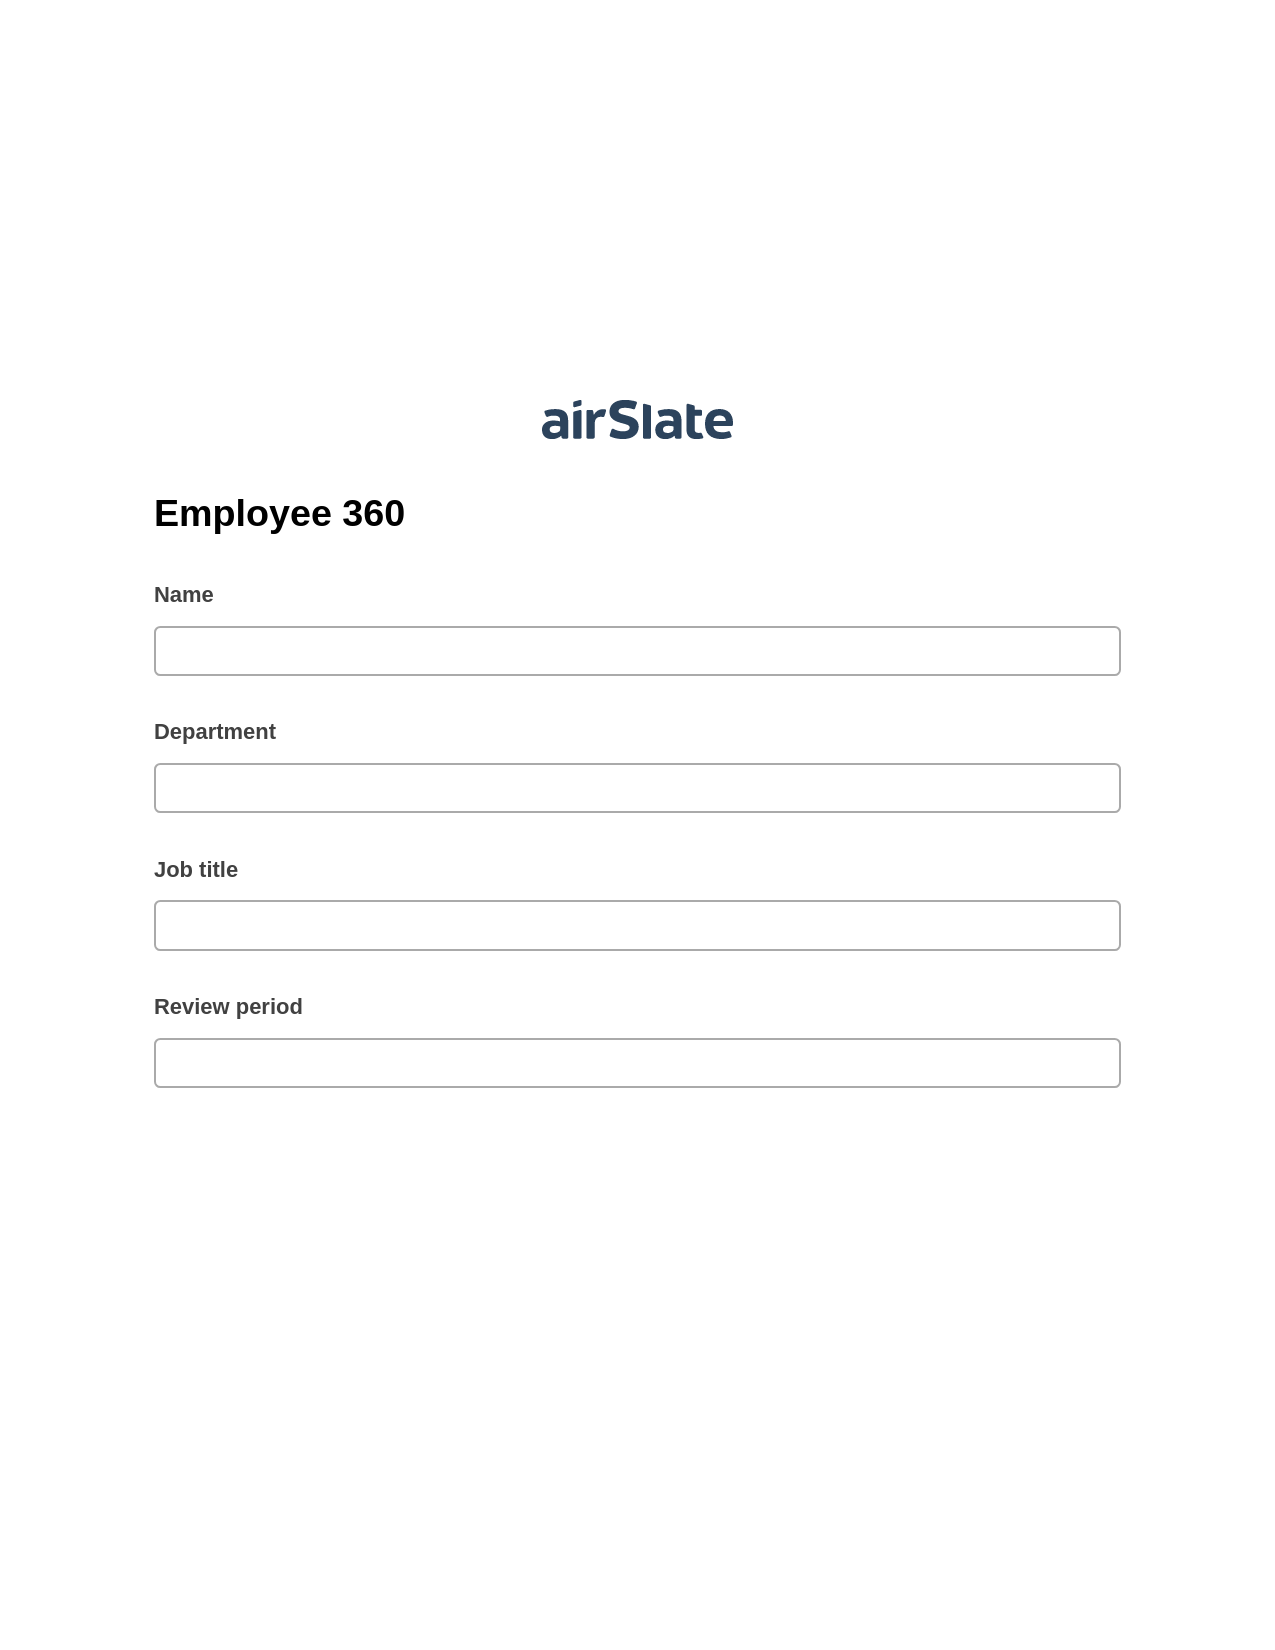 Employee 360 Pre-fill Dropdowns from Google Sheet Bot, Update MS Dynamics 365 Record Bot, Export to NetSuite Bot